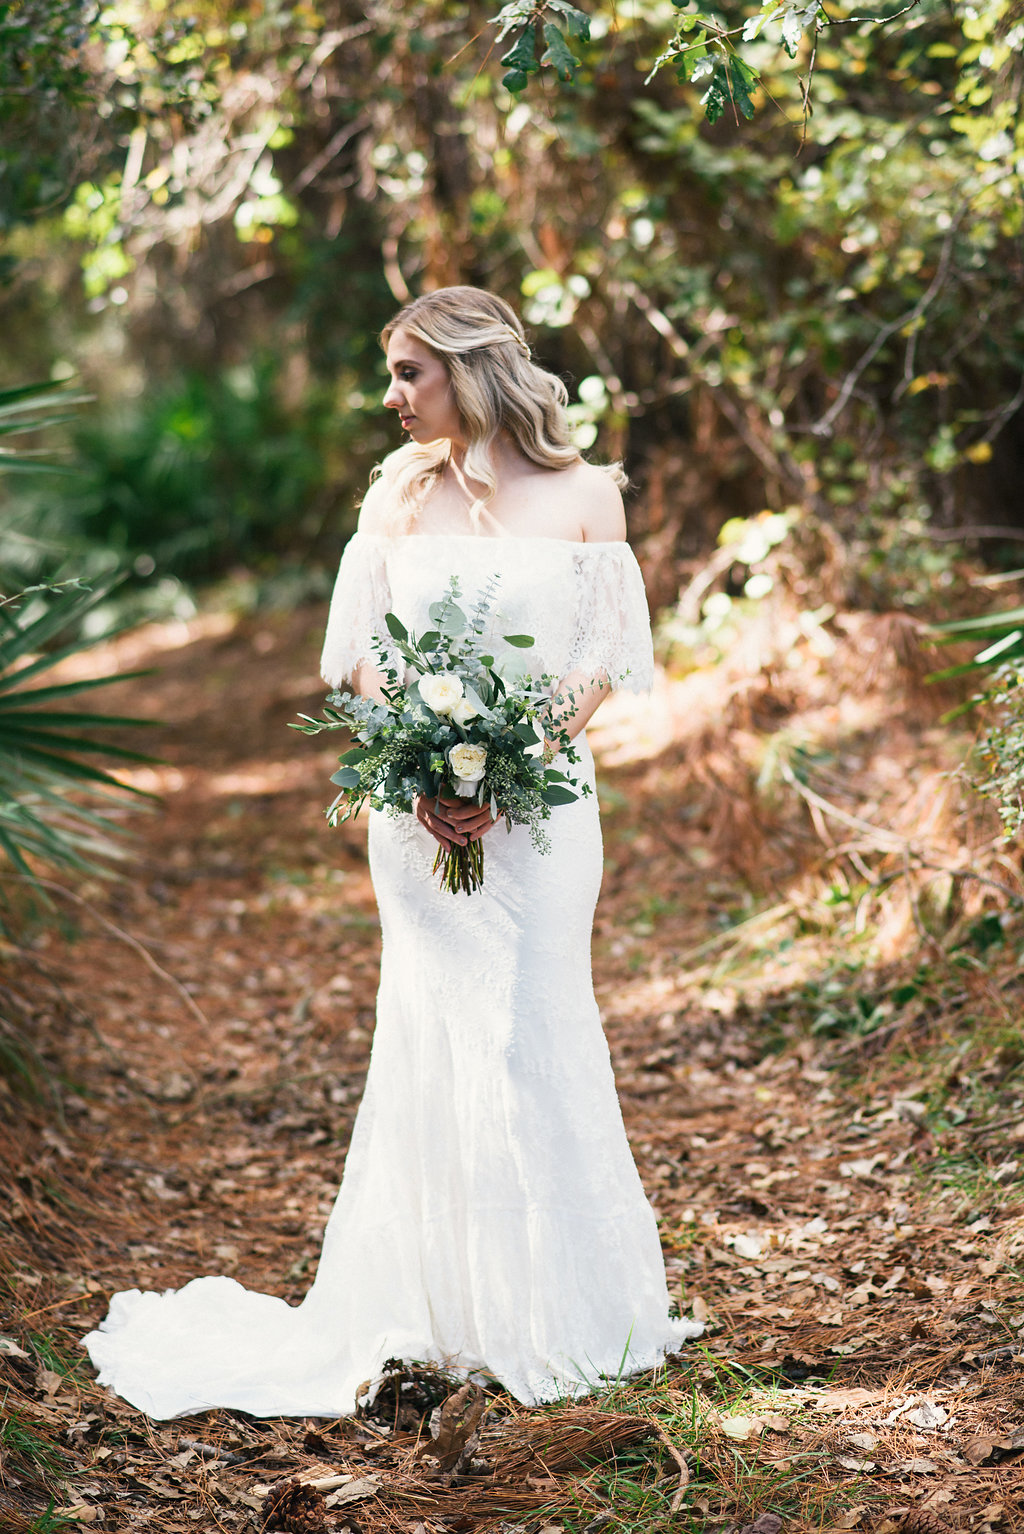 ivory-and-beau-bridal-boutique-meg-hill-photography-laurence-daughters-of-simone-boho-wedding-gown-douglas-ga-wedding-10.jpg